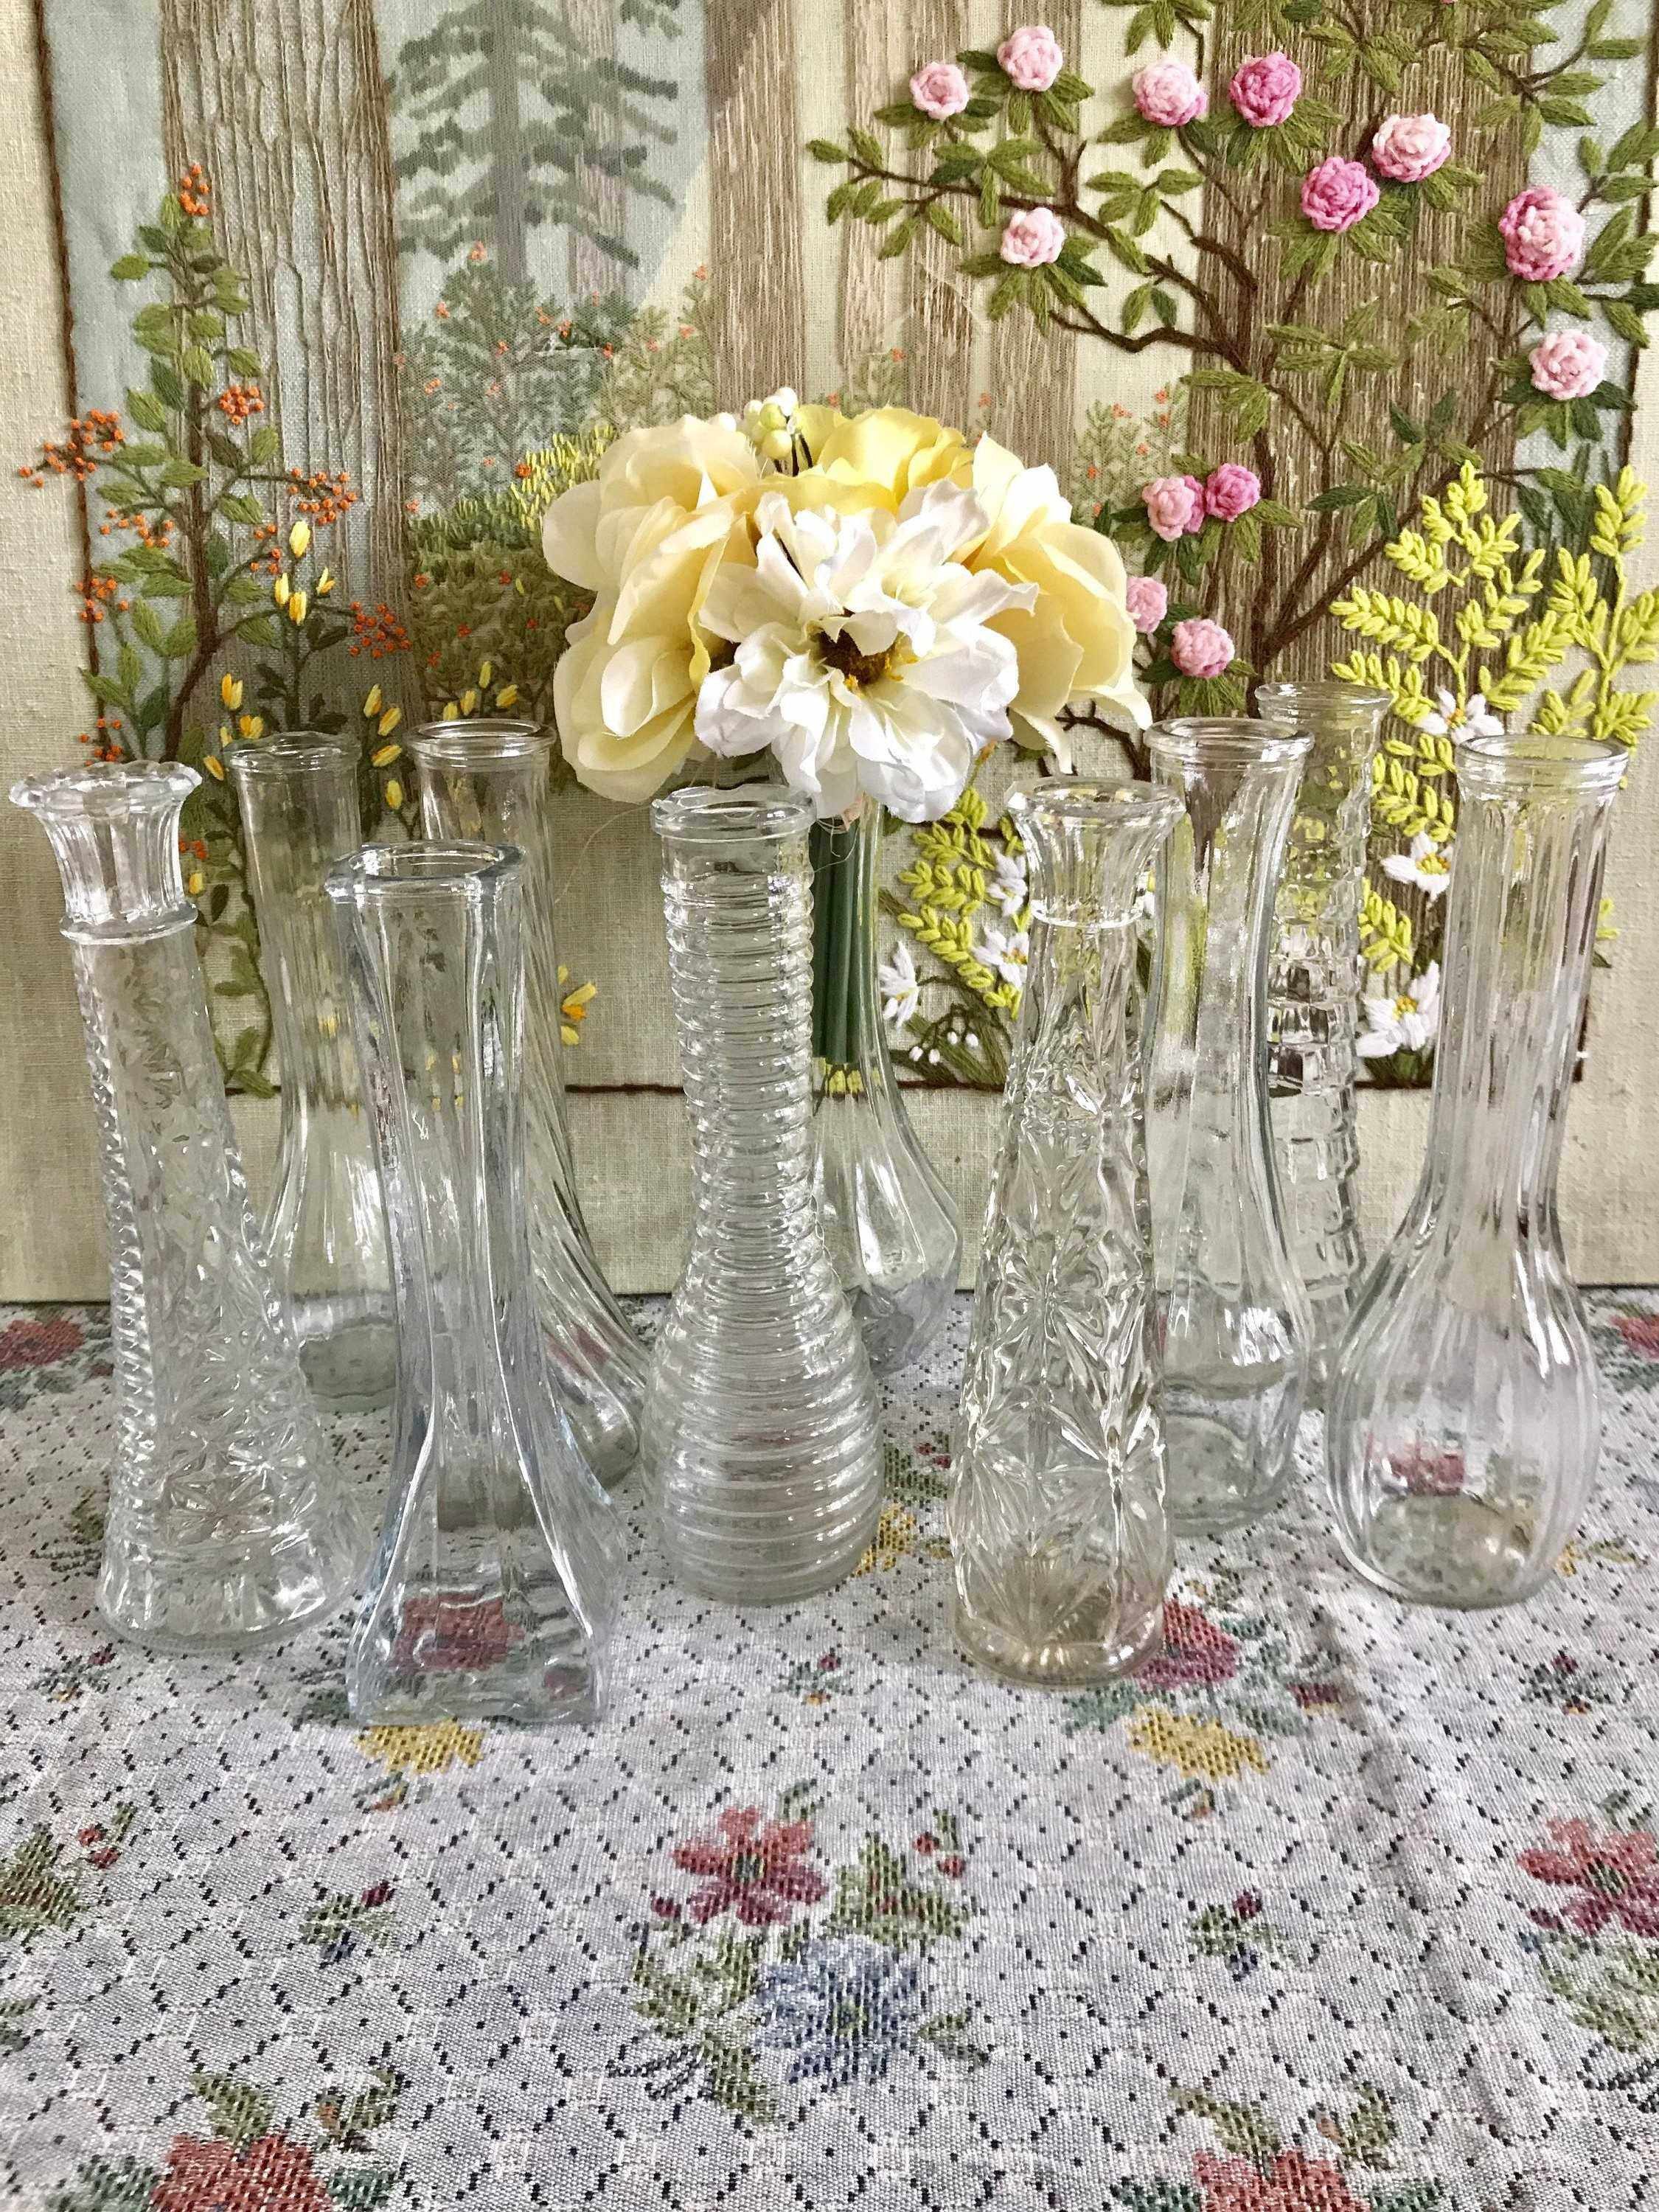 29 Lovely Glass Vases for Wedding Table Decorations 2022 free download glass vases for wedding table decorations of cheap wedding decorations for tables awesome living room vases throughout cheap wedding decorations for tables awesome living room vases wedding 